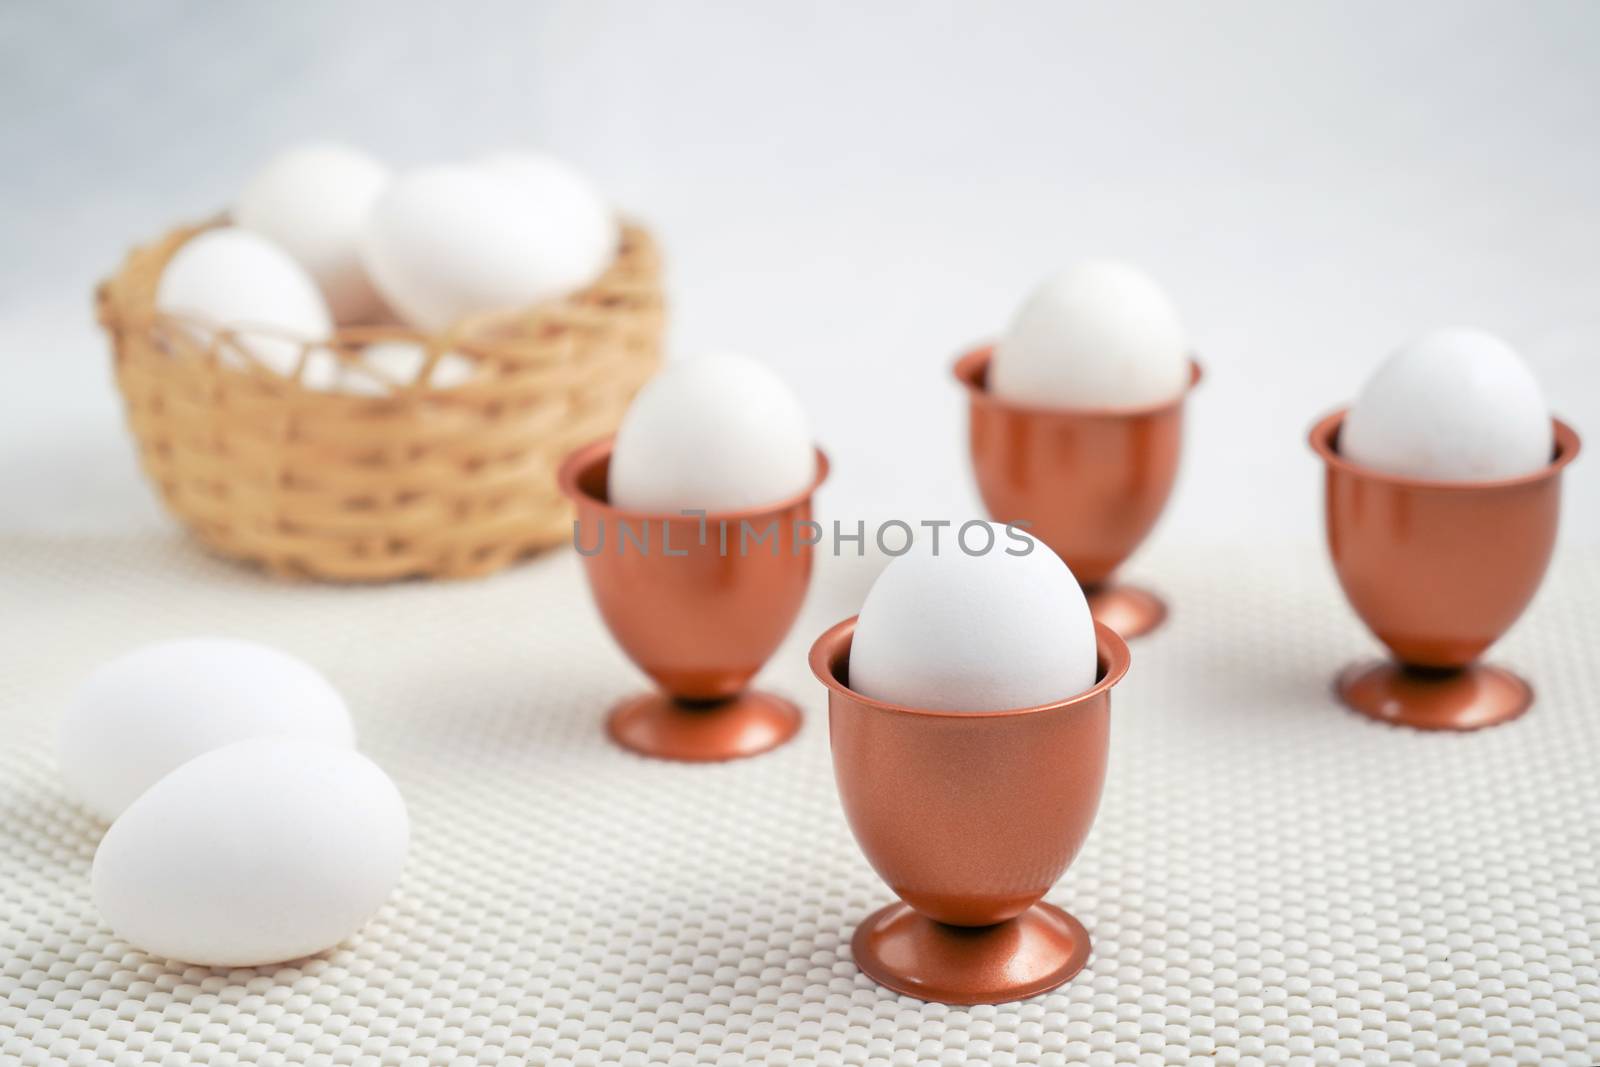 An eggs into a cooper eggs cup and three more cooper eggs cup with one eggs each and a basket with eggs at bottom